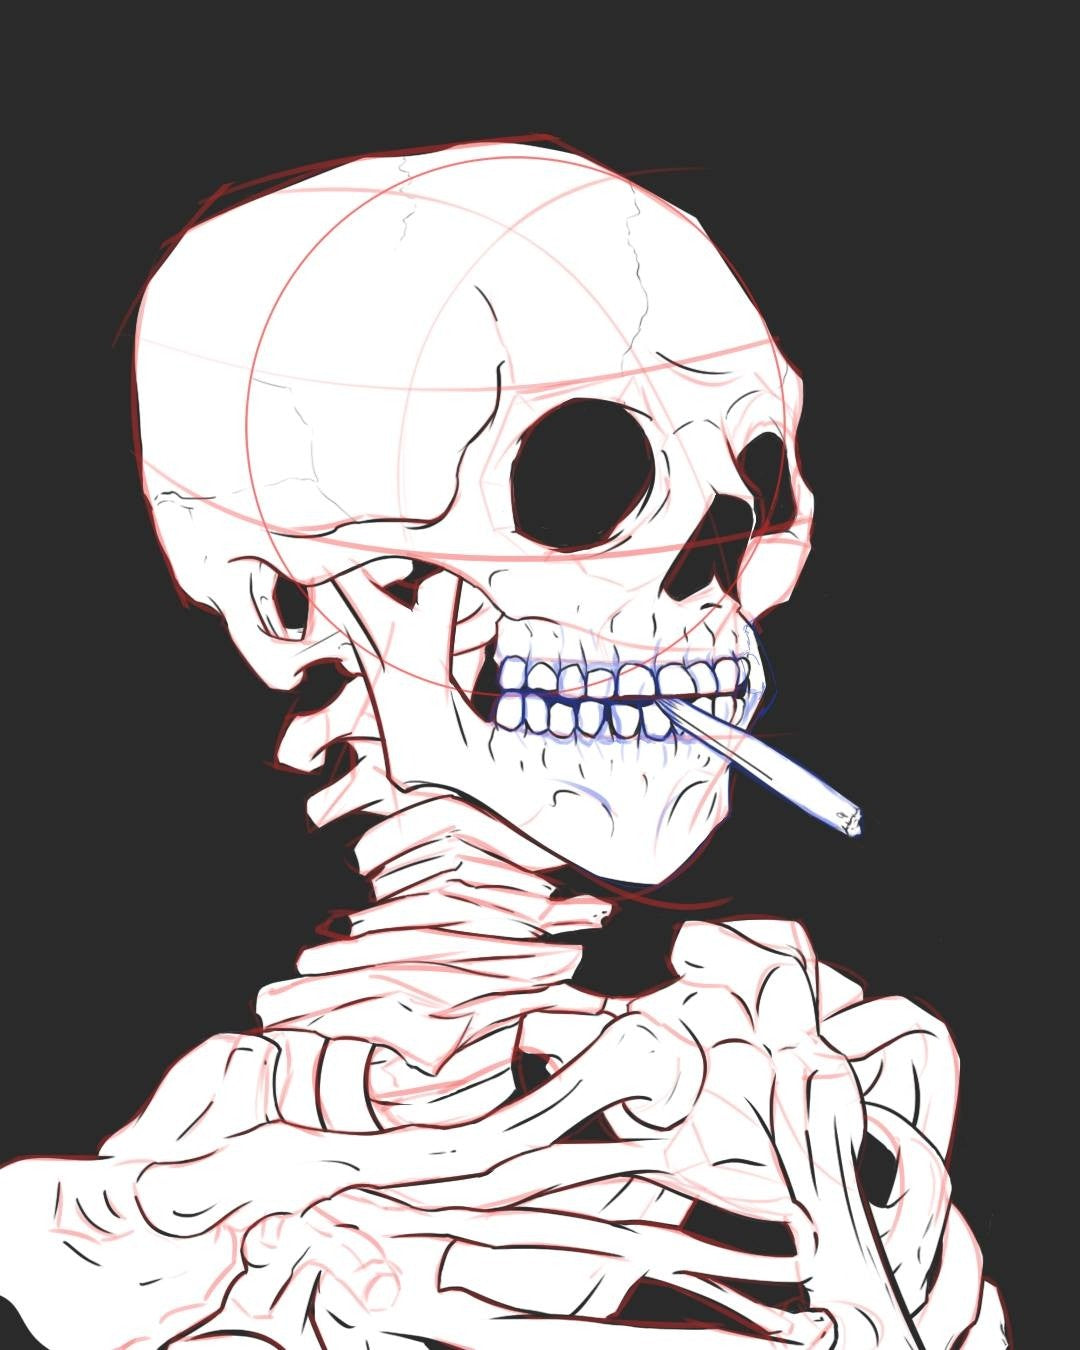 Vincent Van Gogh’s Gothic Masterpiece: Skull of a Skeleton with Burning Cigarette